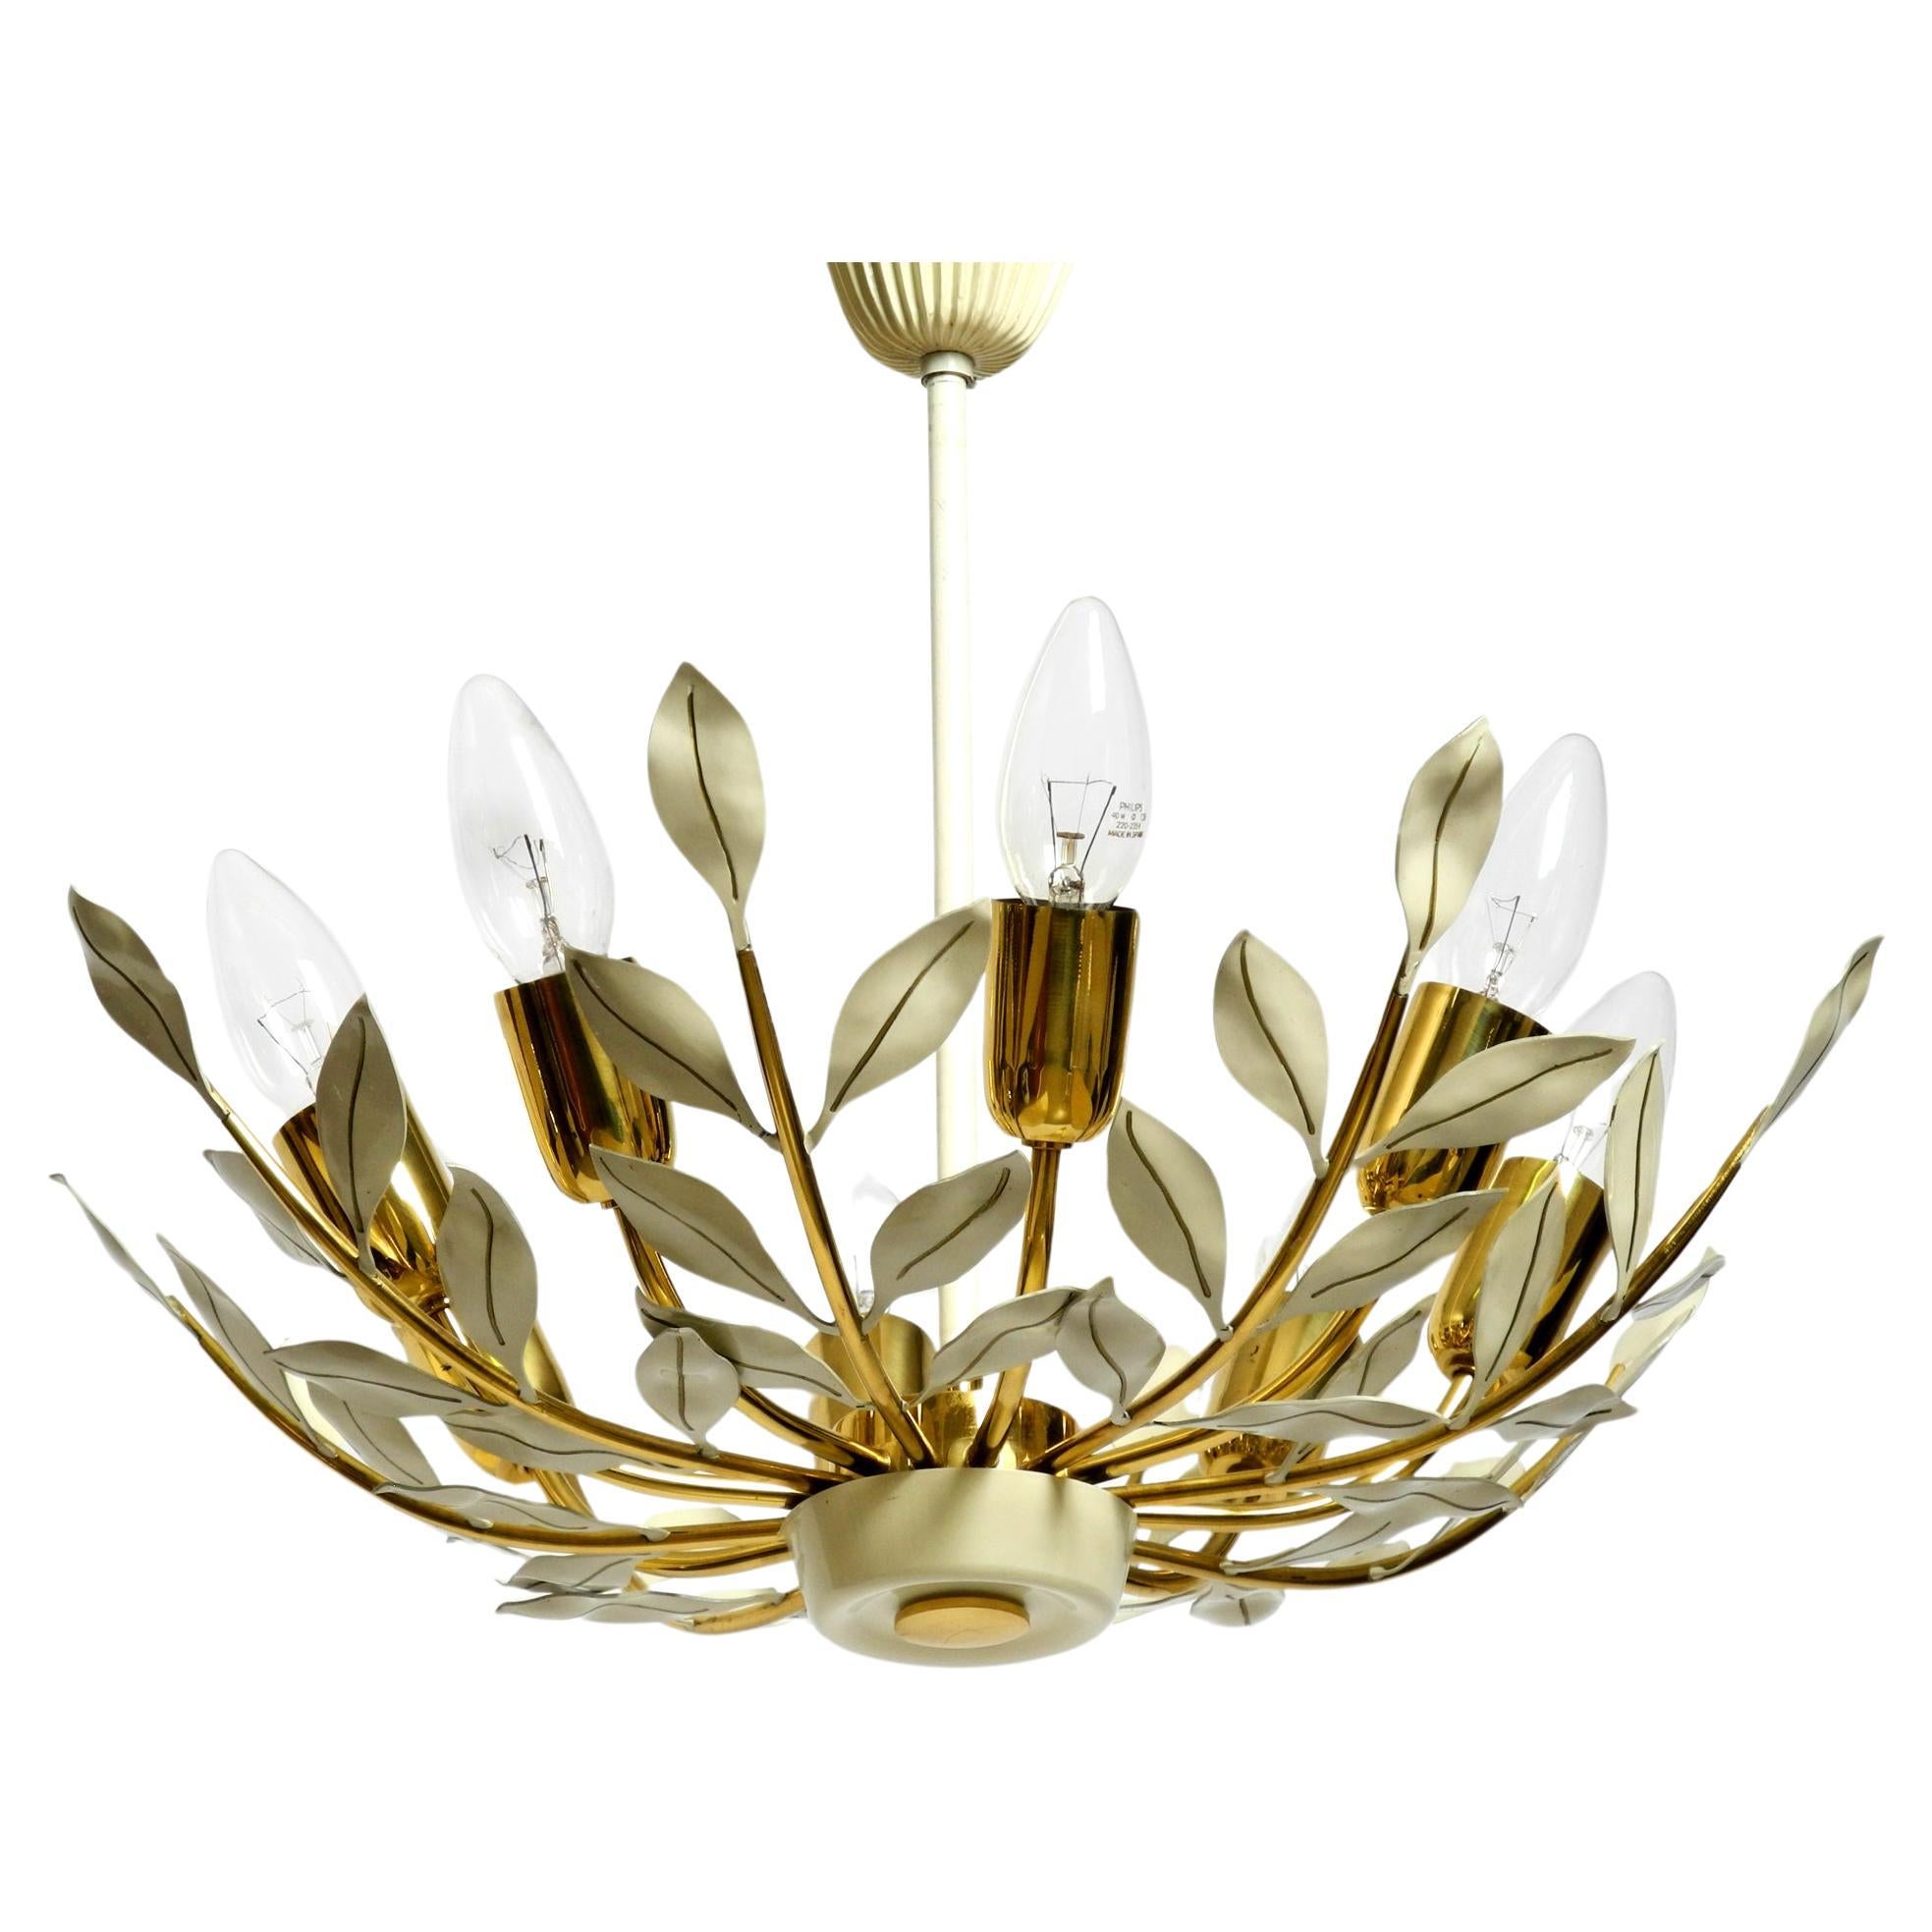 Small 1950s brass Sputnik ceiling lamp with 8 arms by Vereinigte Werkstätten For Sale